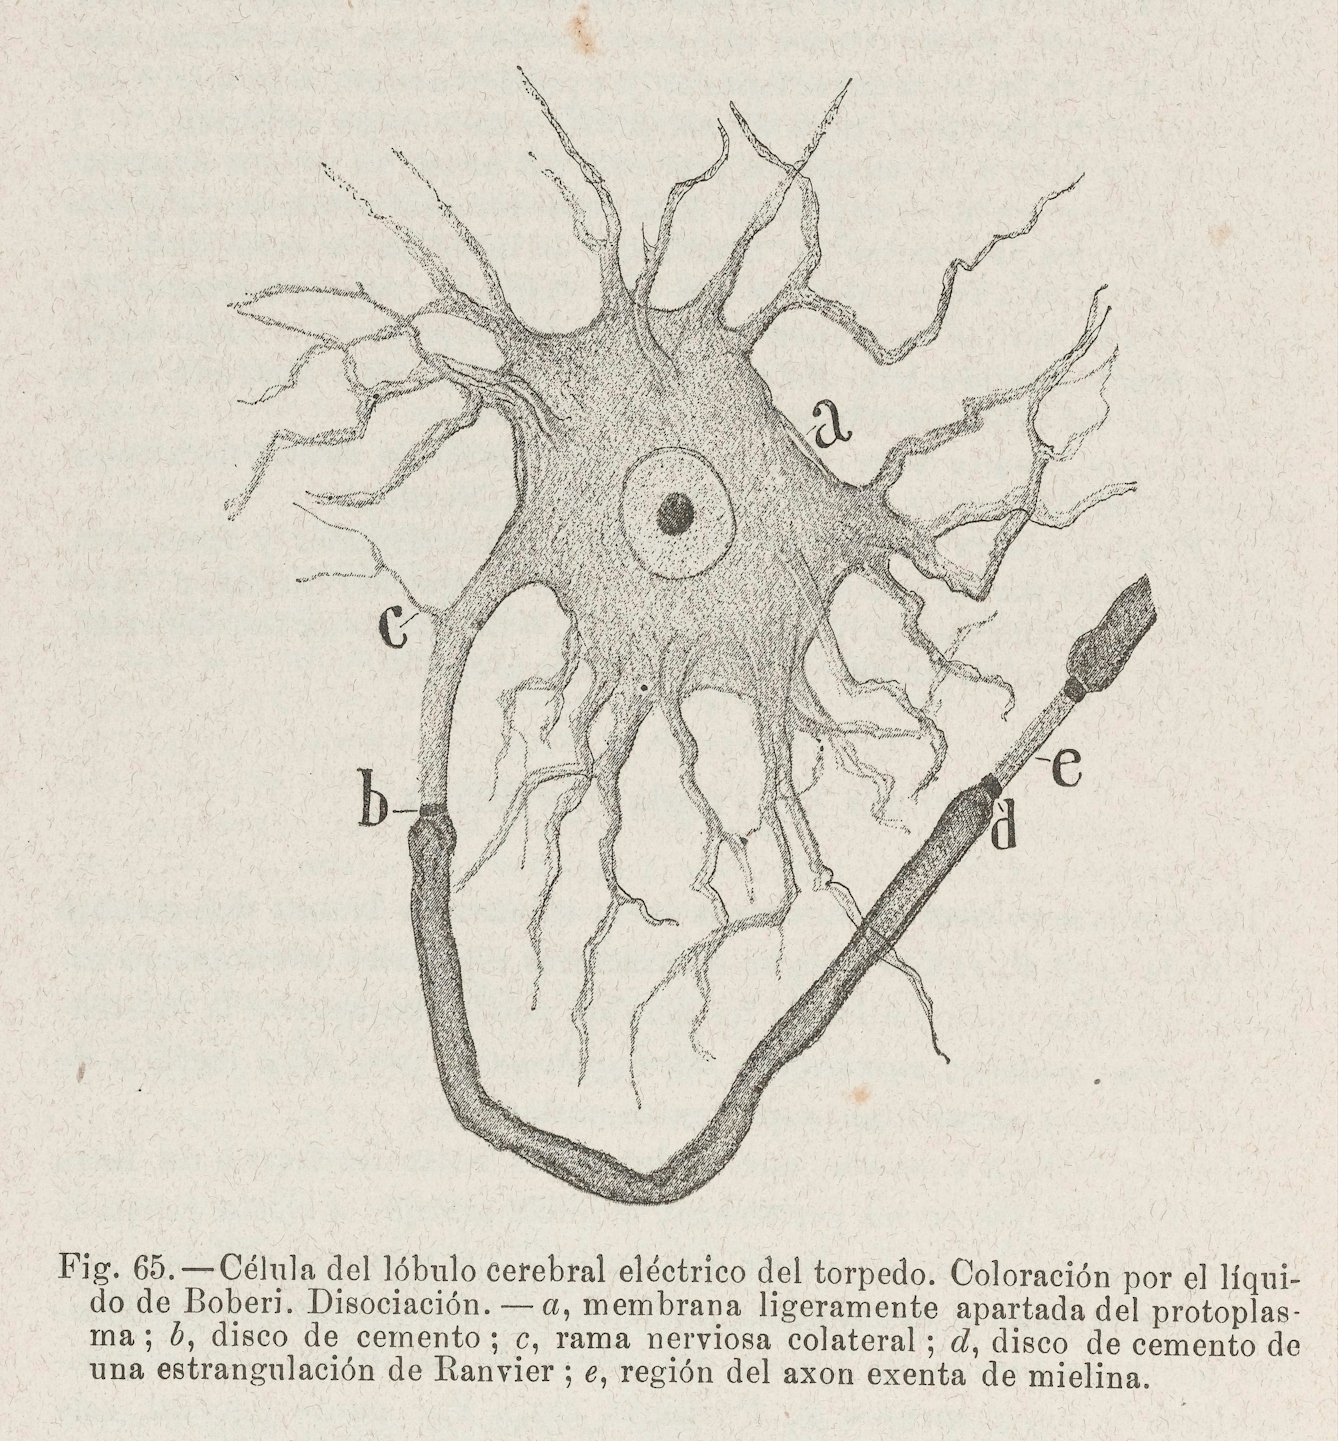 A scientific illustration of a neuron or brain cell